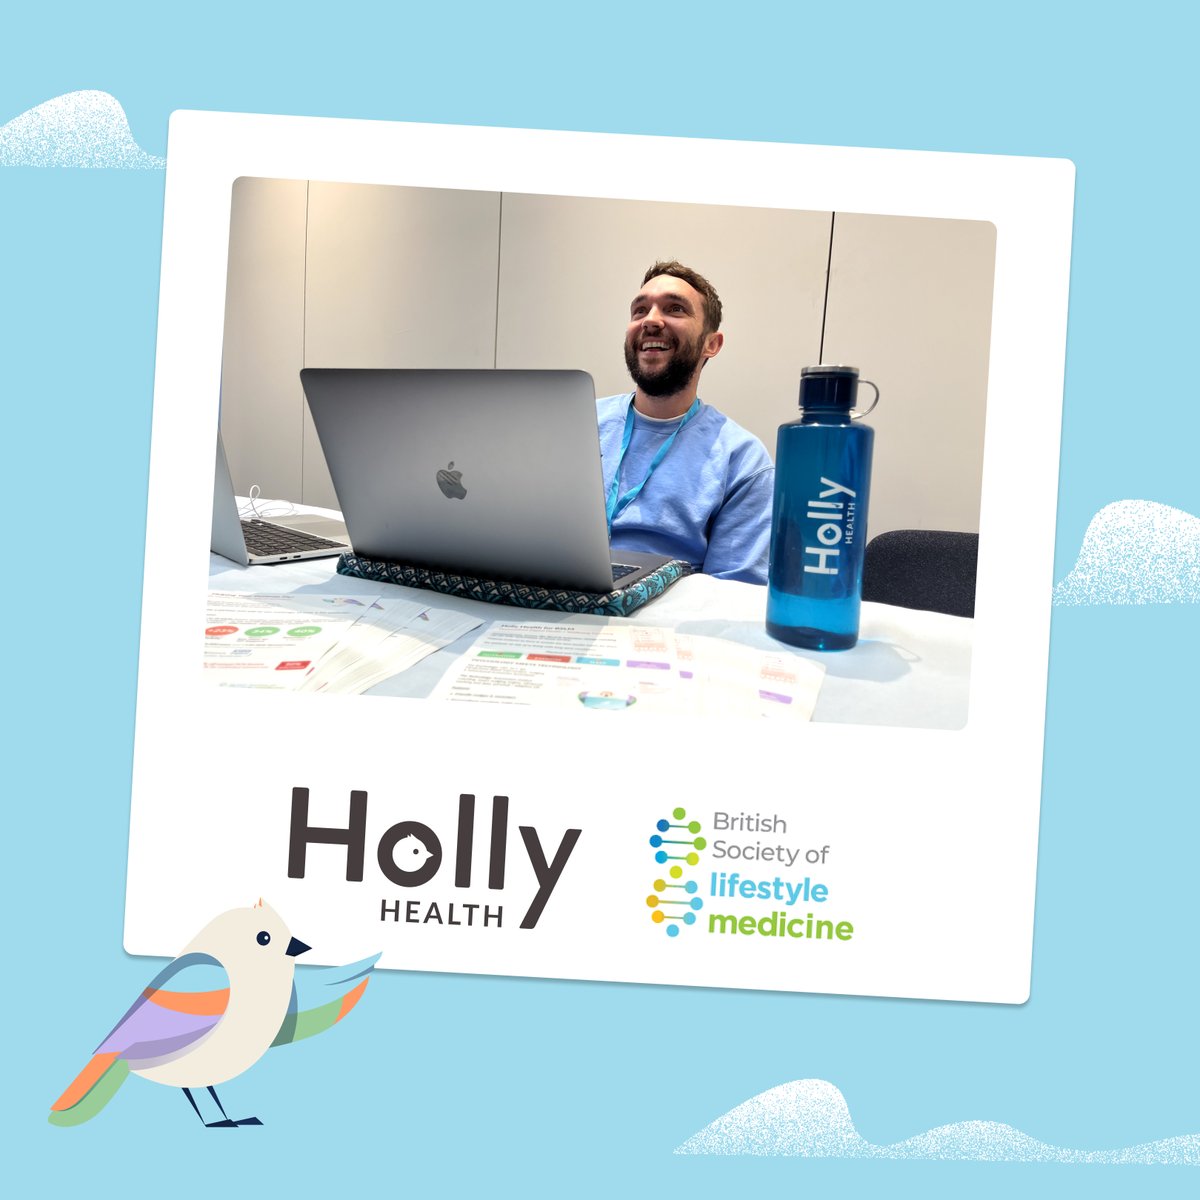 Danny, Holly Health CCO looks back over #BSLM2023 last week: 'BSLM couldn't be more aligned with what we hold true at Holly Health. We always leave the conference educated, energised and excited to nurture the relationships we've formed.' 🙌 @BritSocLM